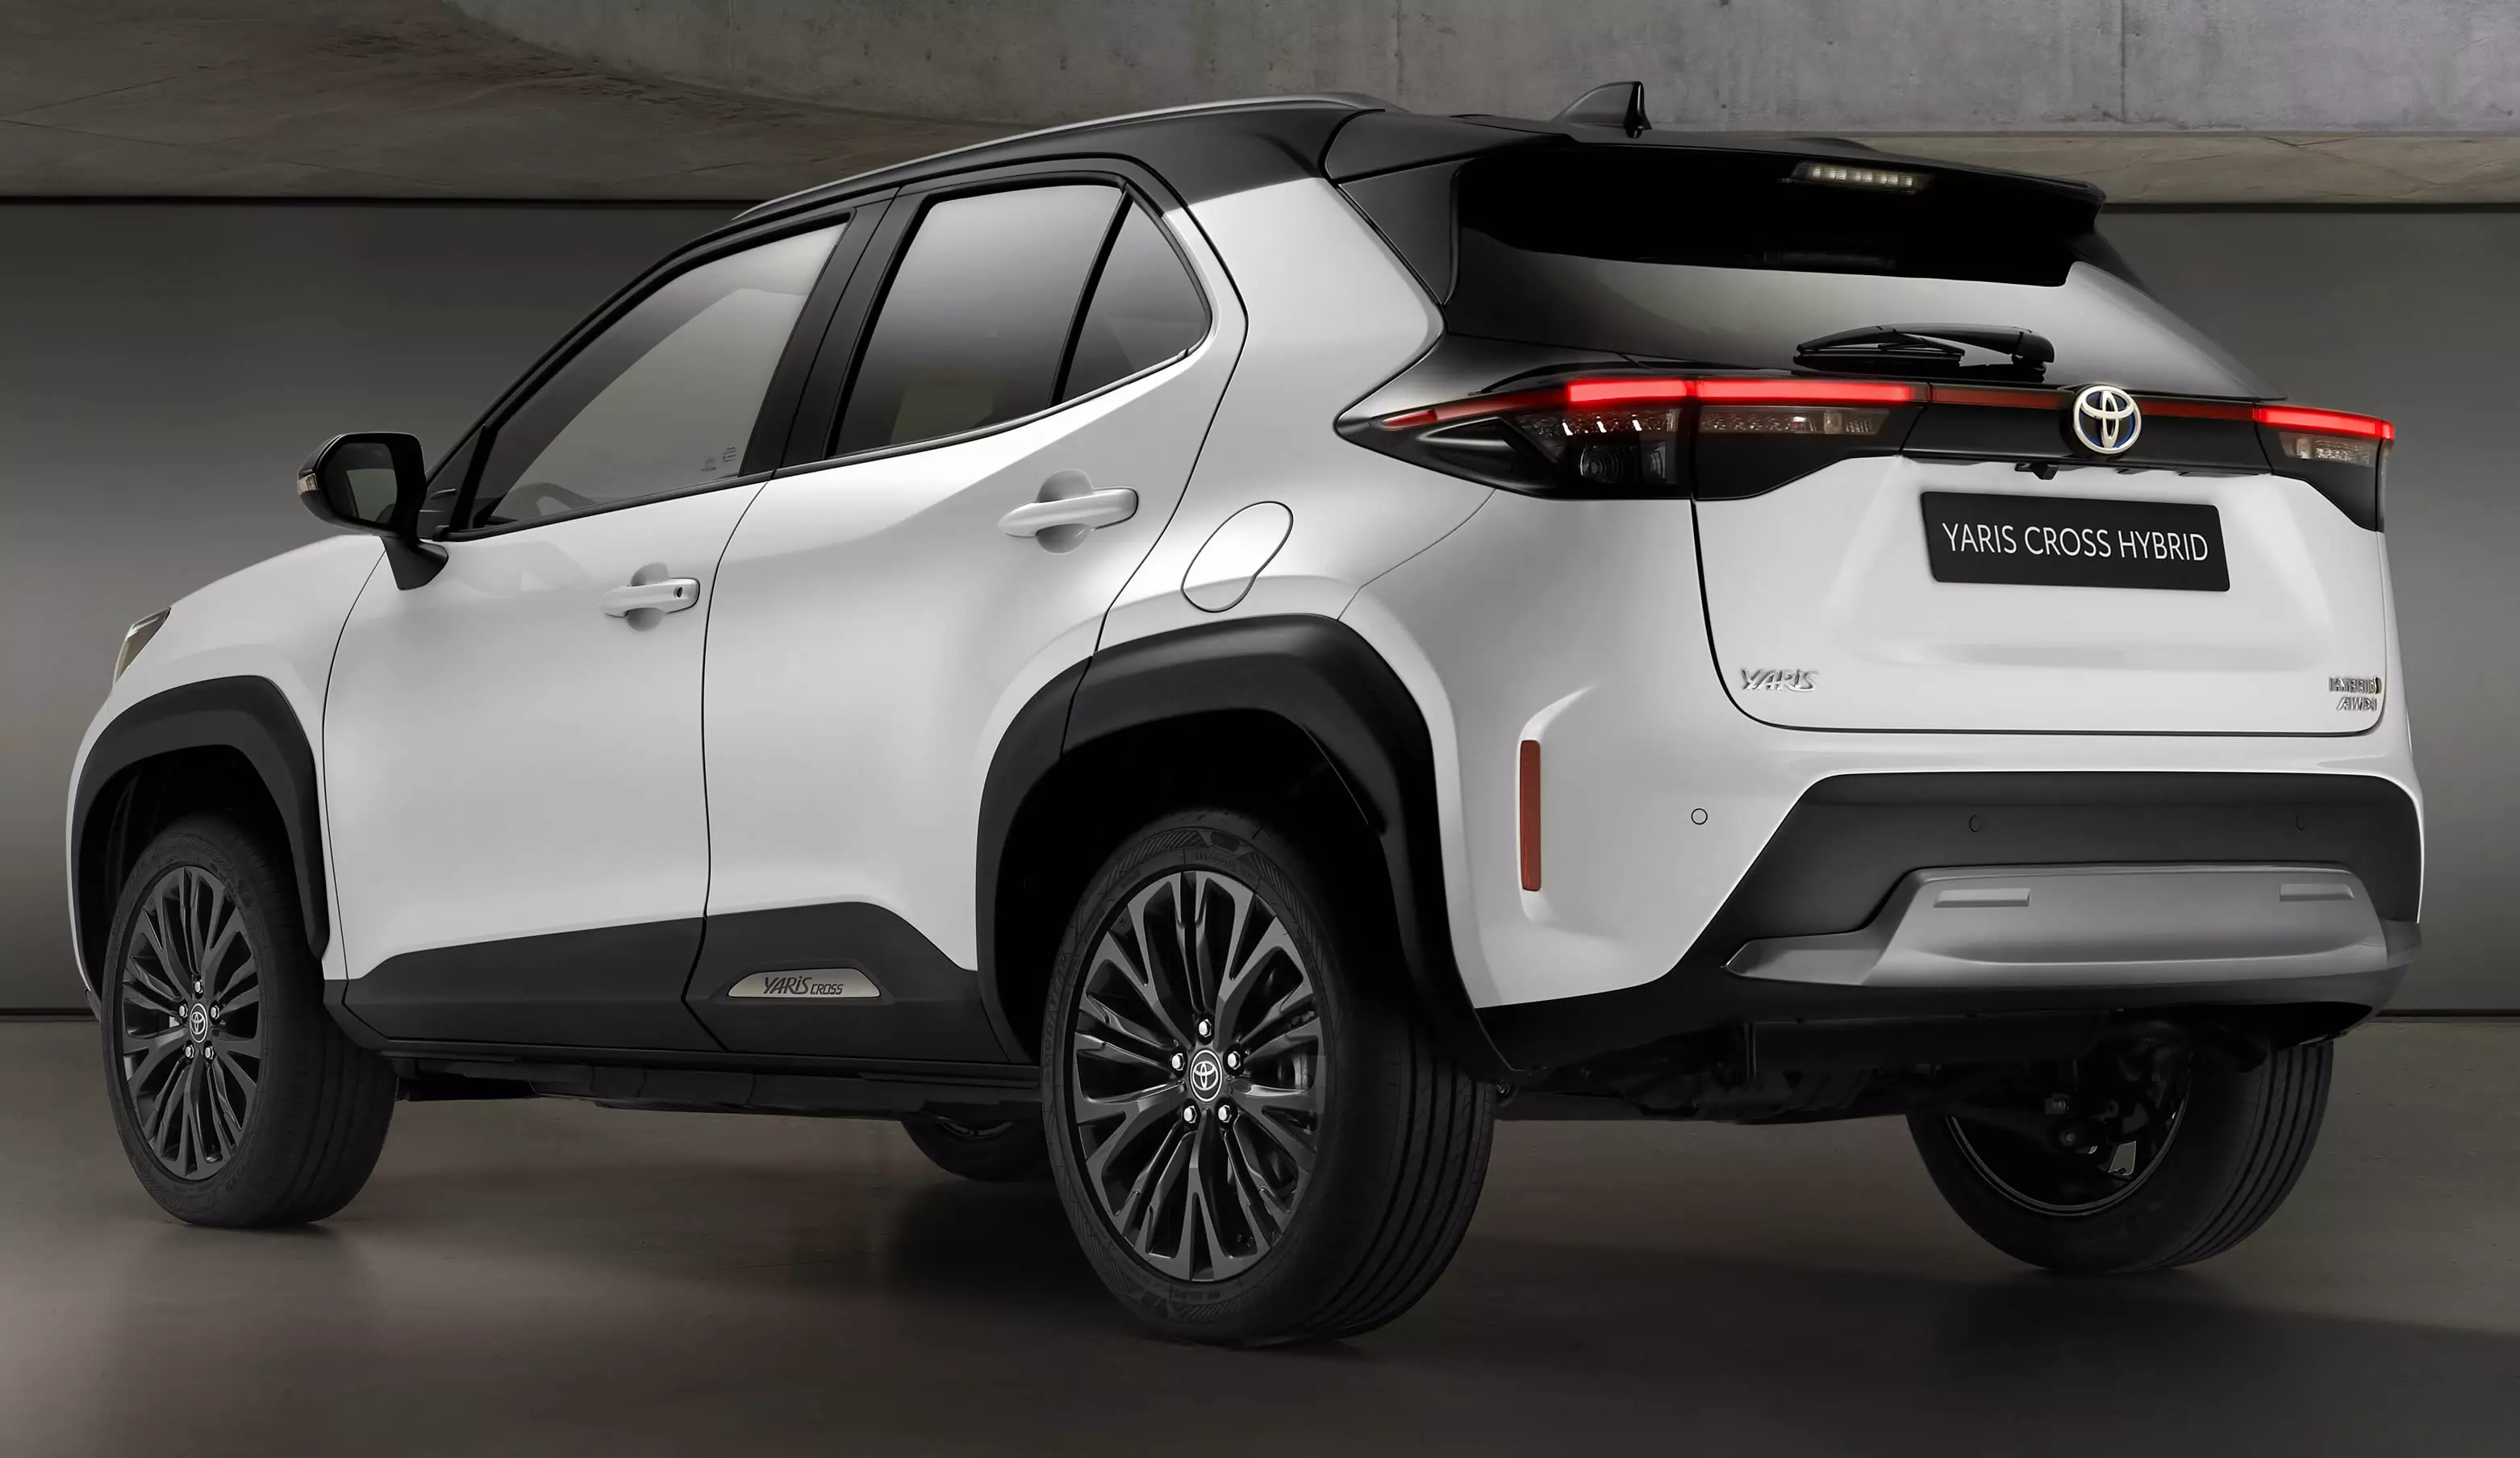 2021 new Toyota Yaris Cross Dynamic exterior image from rear